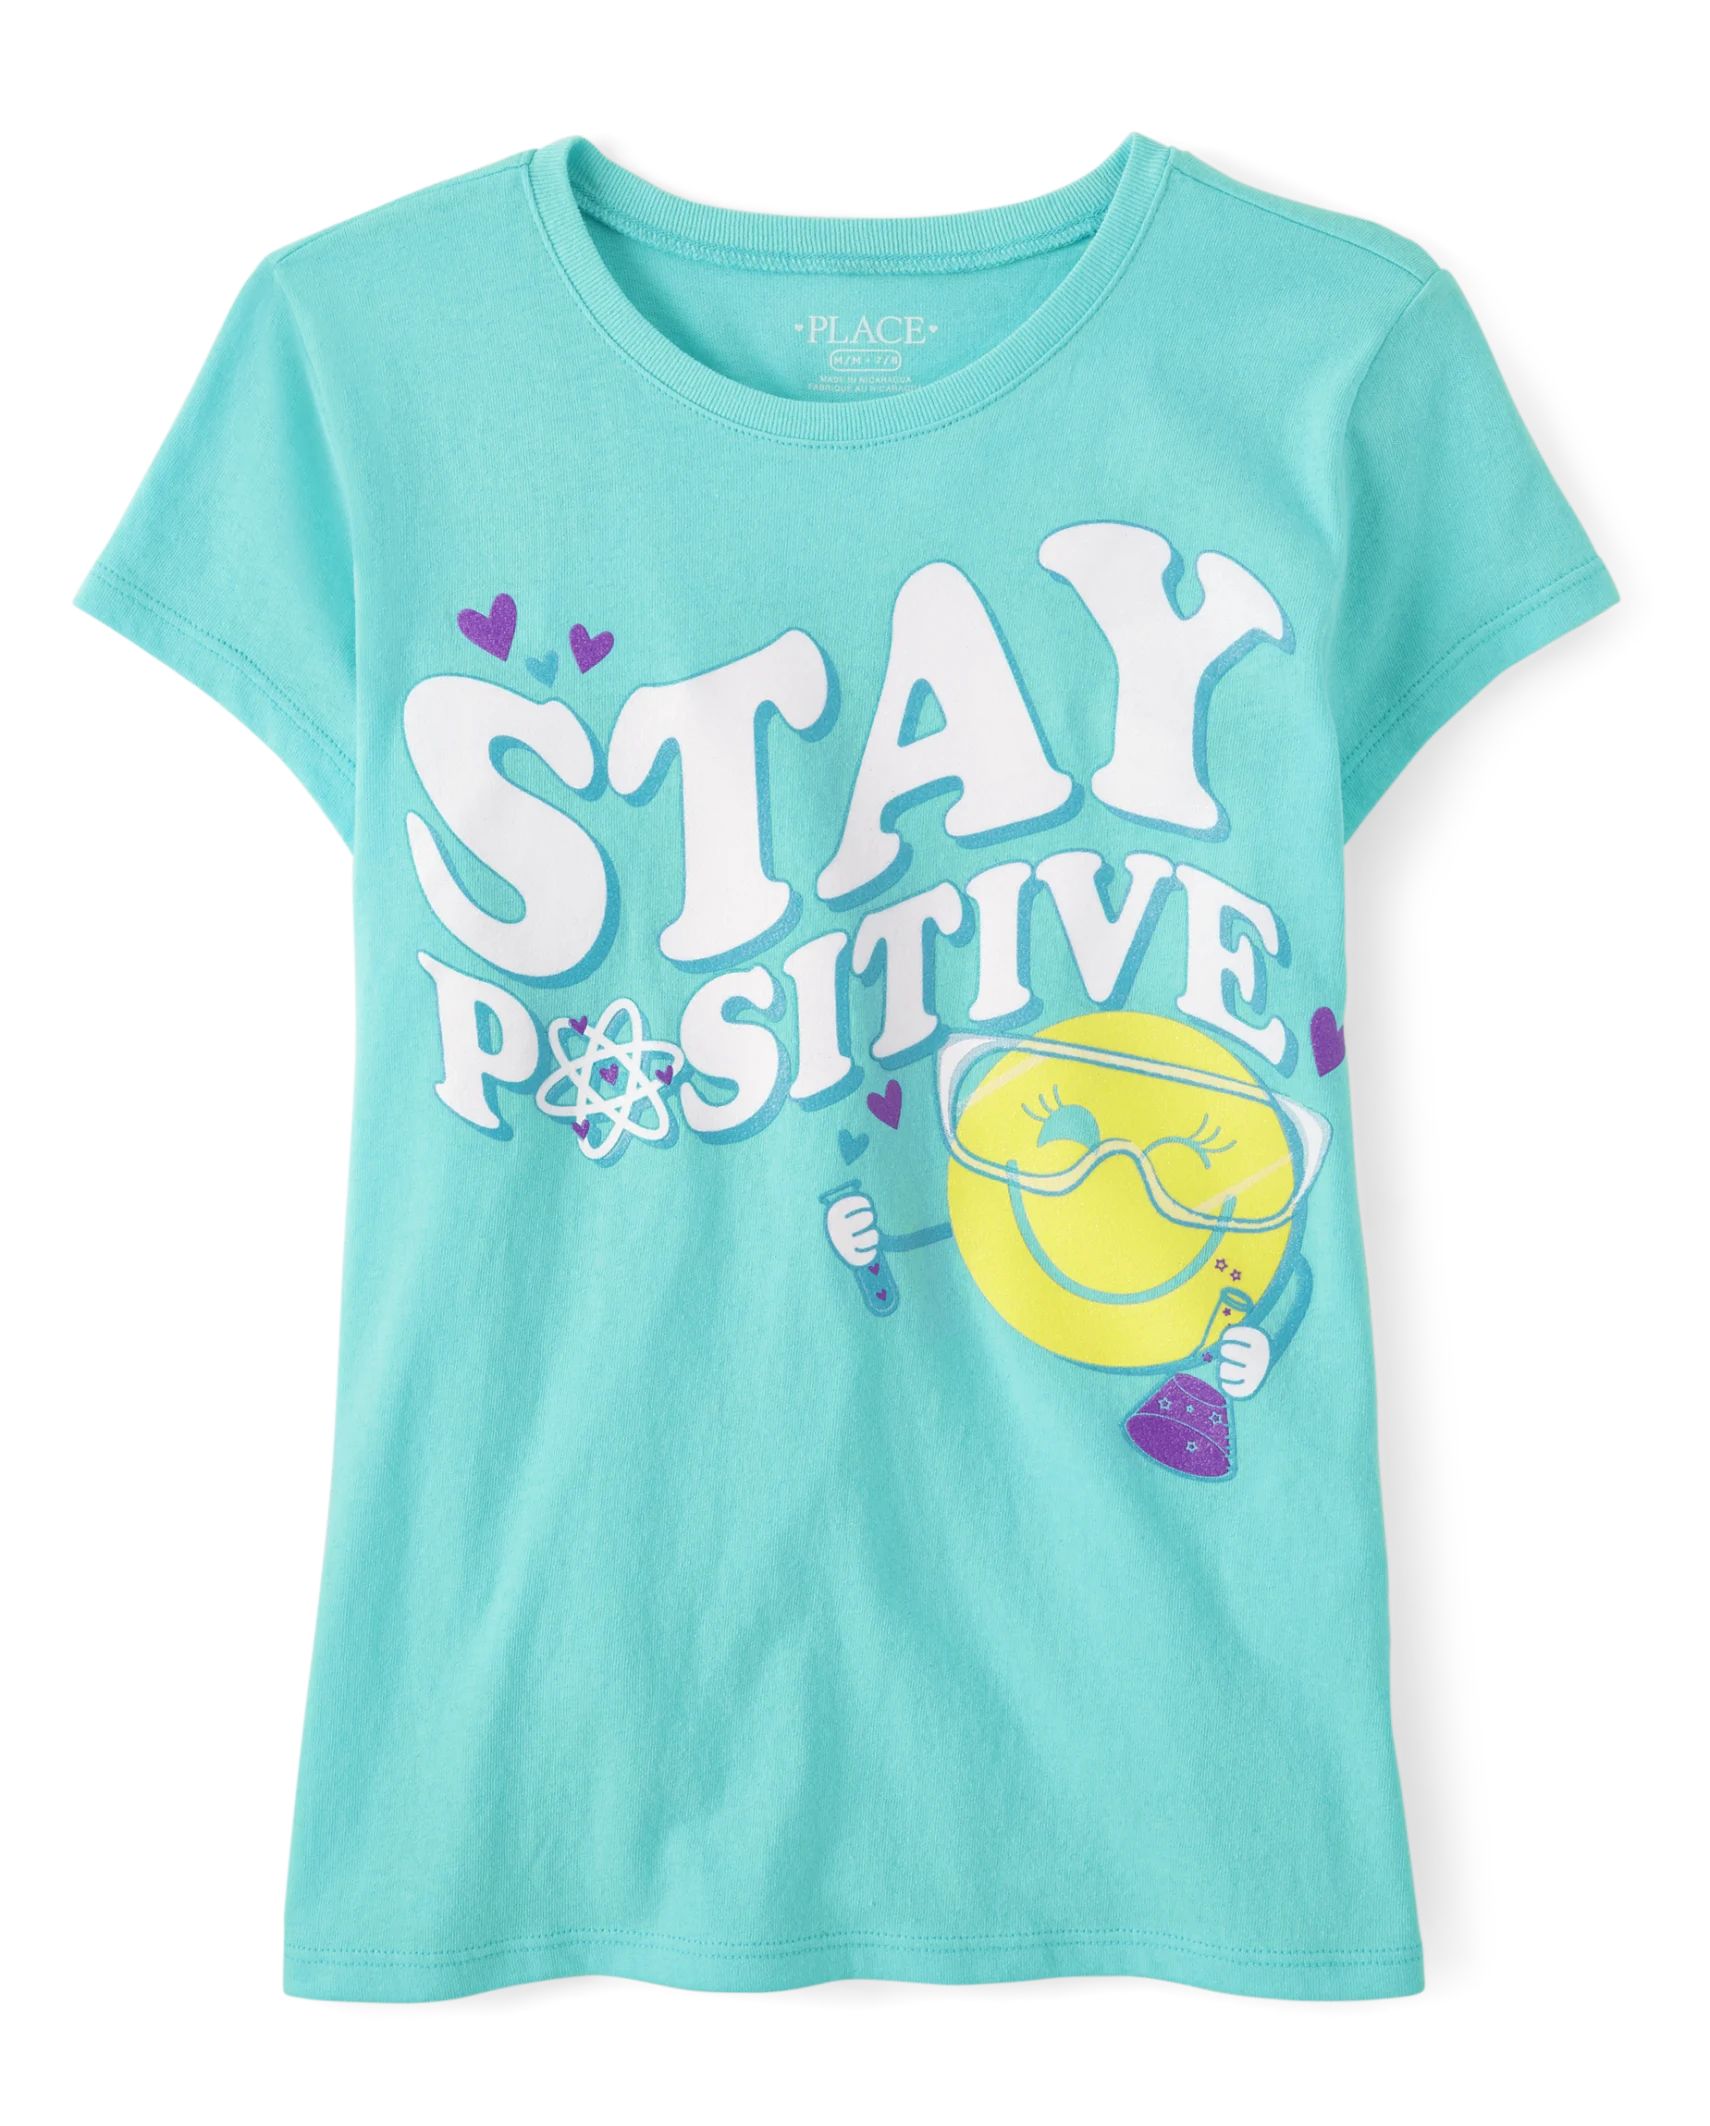 Girls Stay Positive Graphic Tee - blue radiance | The Children's Place